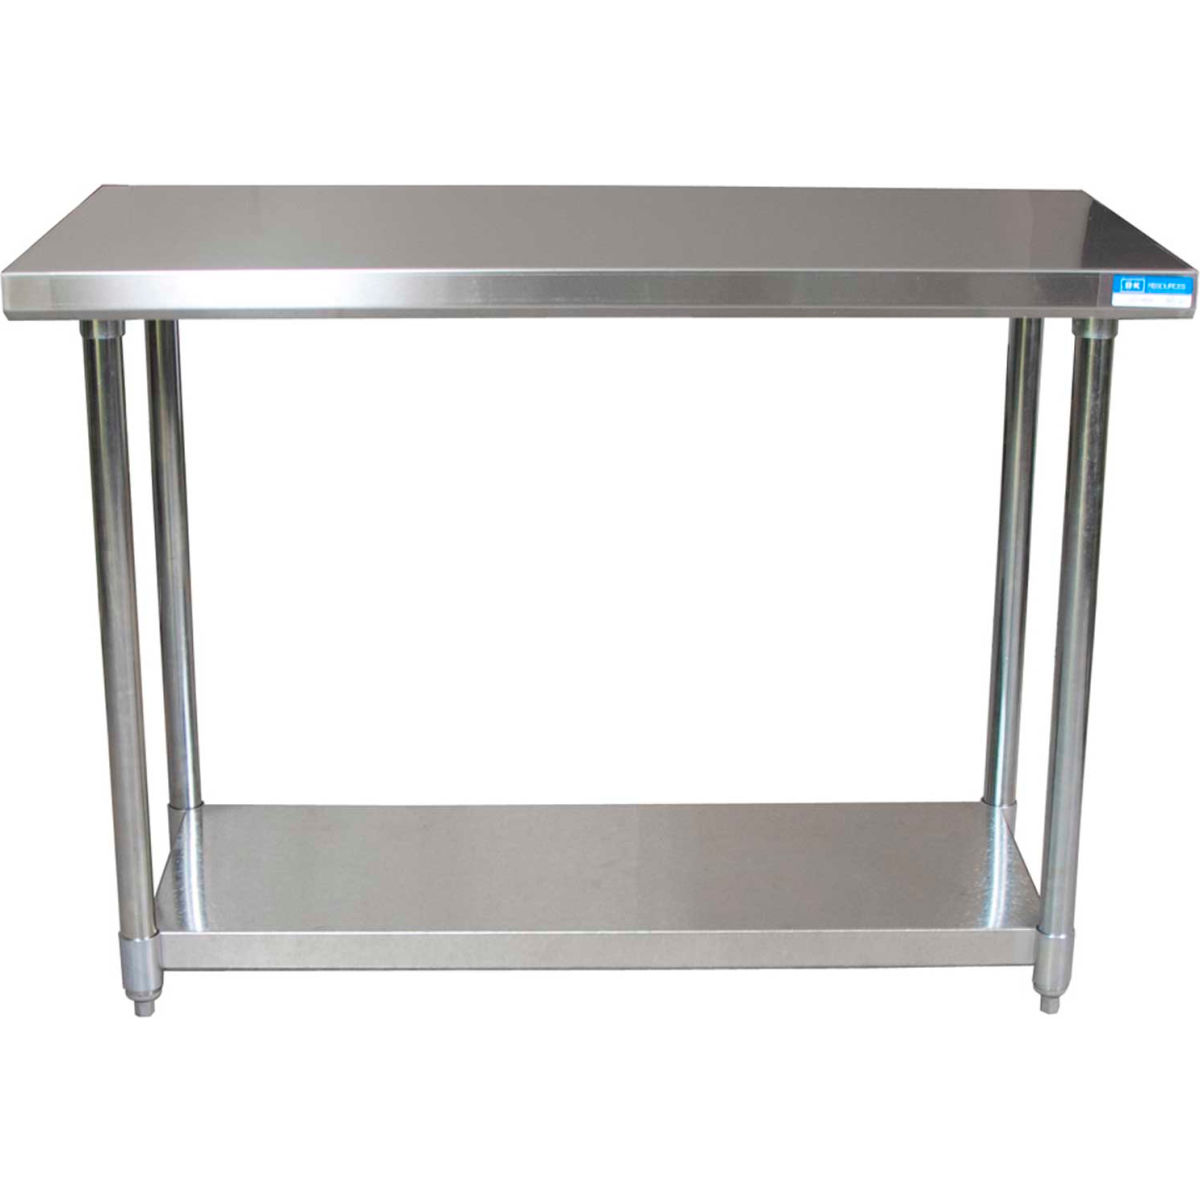 Picture of BK Resources B1516249 16 Gauge 304 Series Stainless & Galvanised Shelf Workbench with Undershelf - 48 x 24 in.